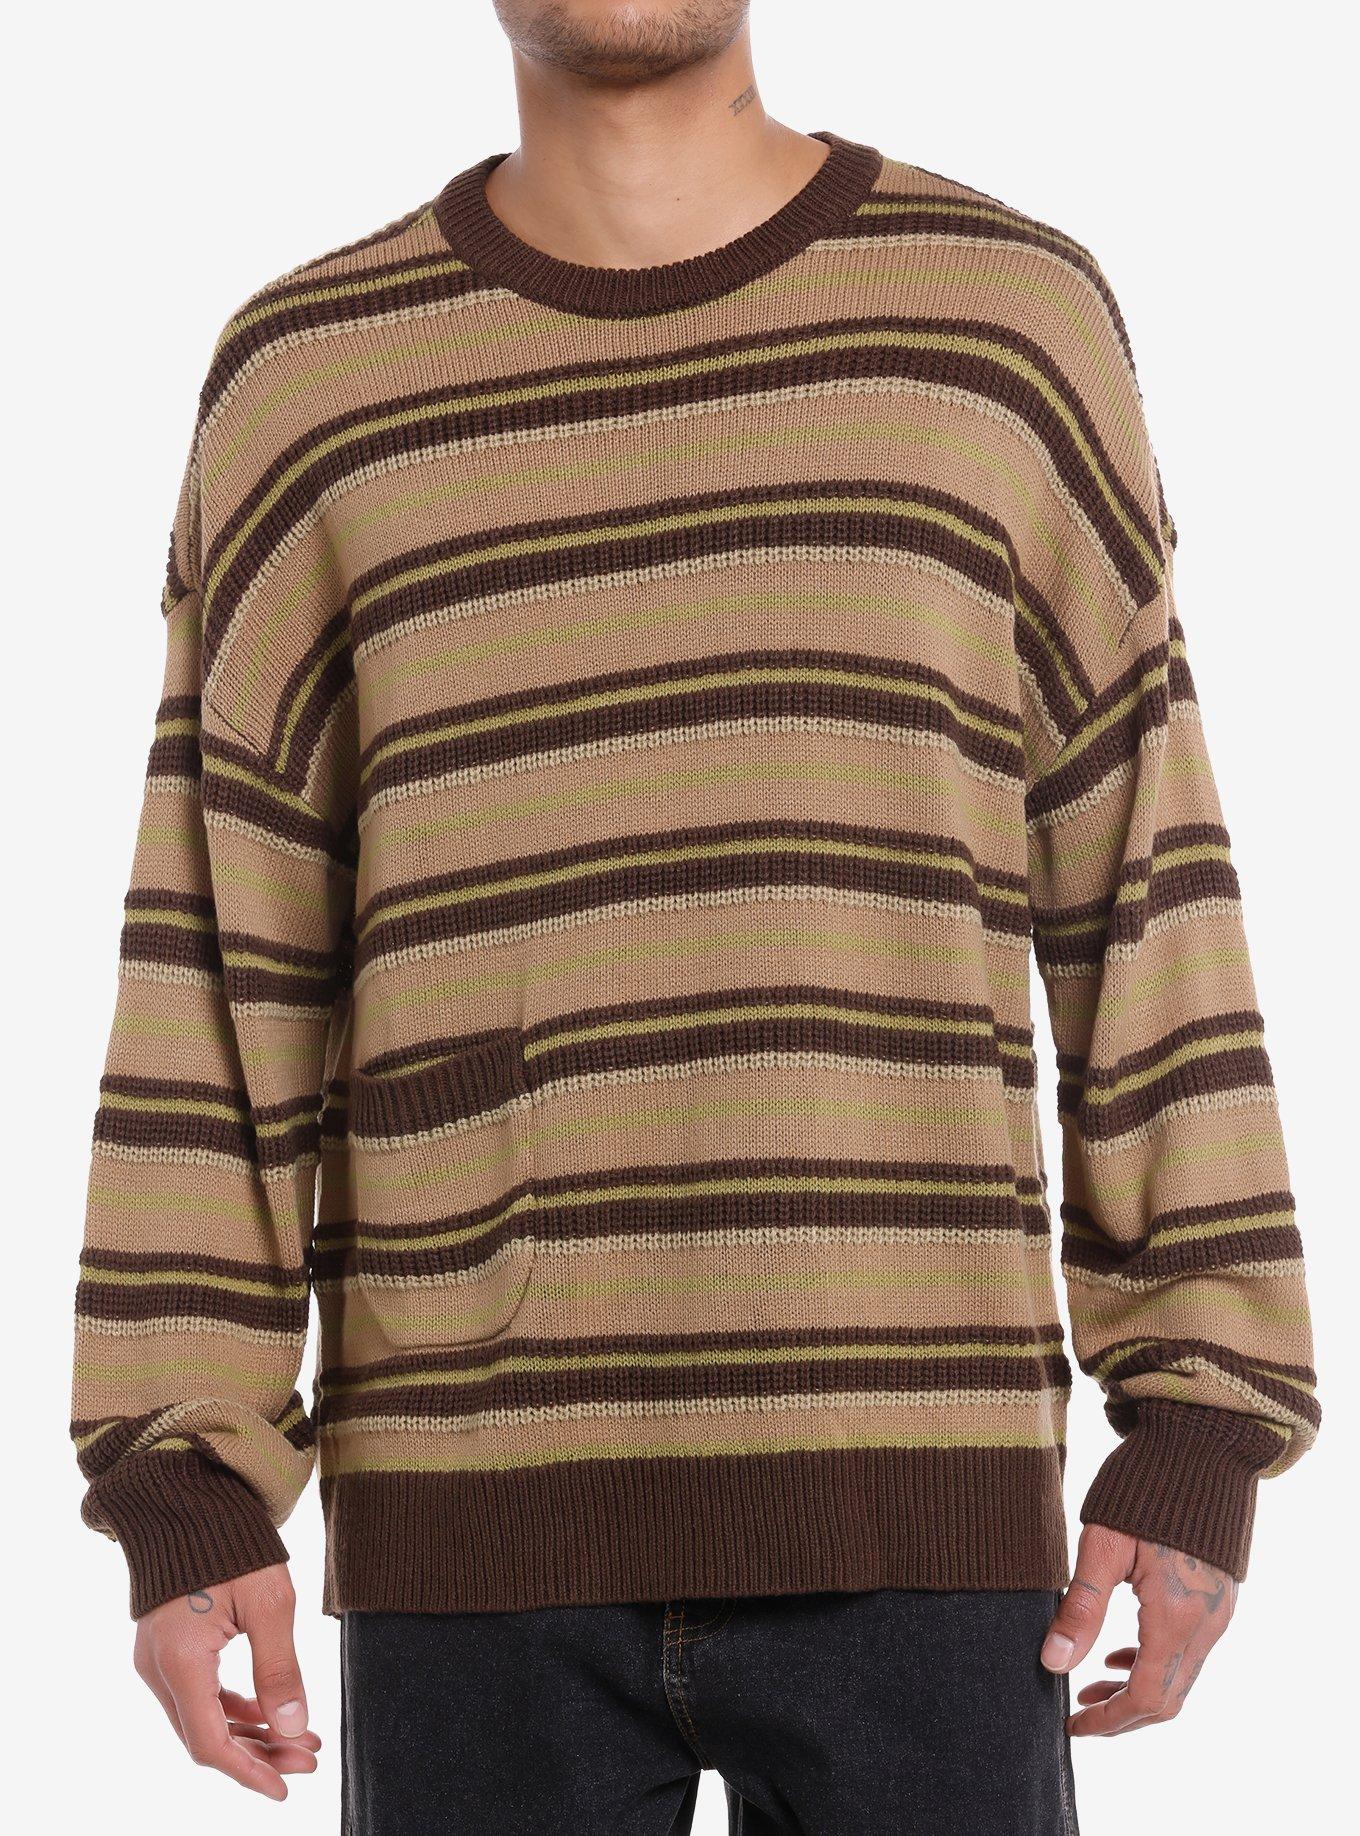 Brown Stripe Pocket Slouchy Knit Sweater | Hot Topic